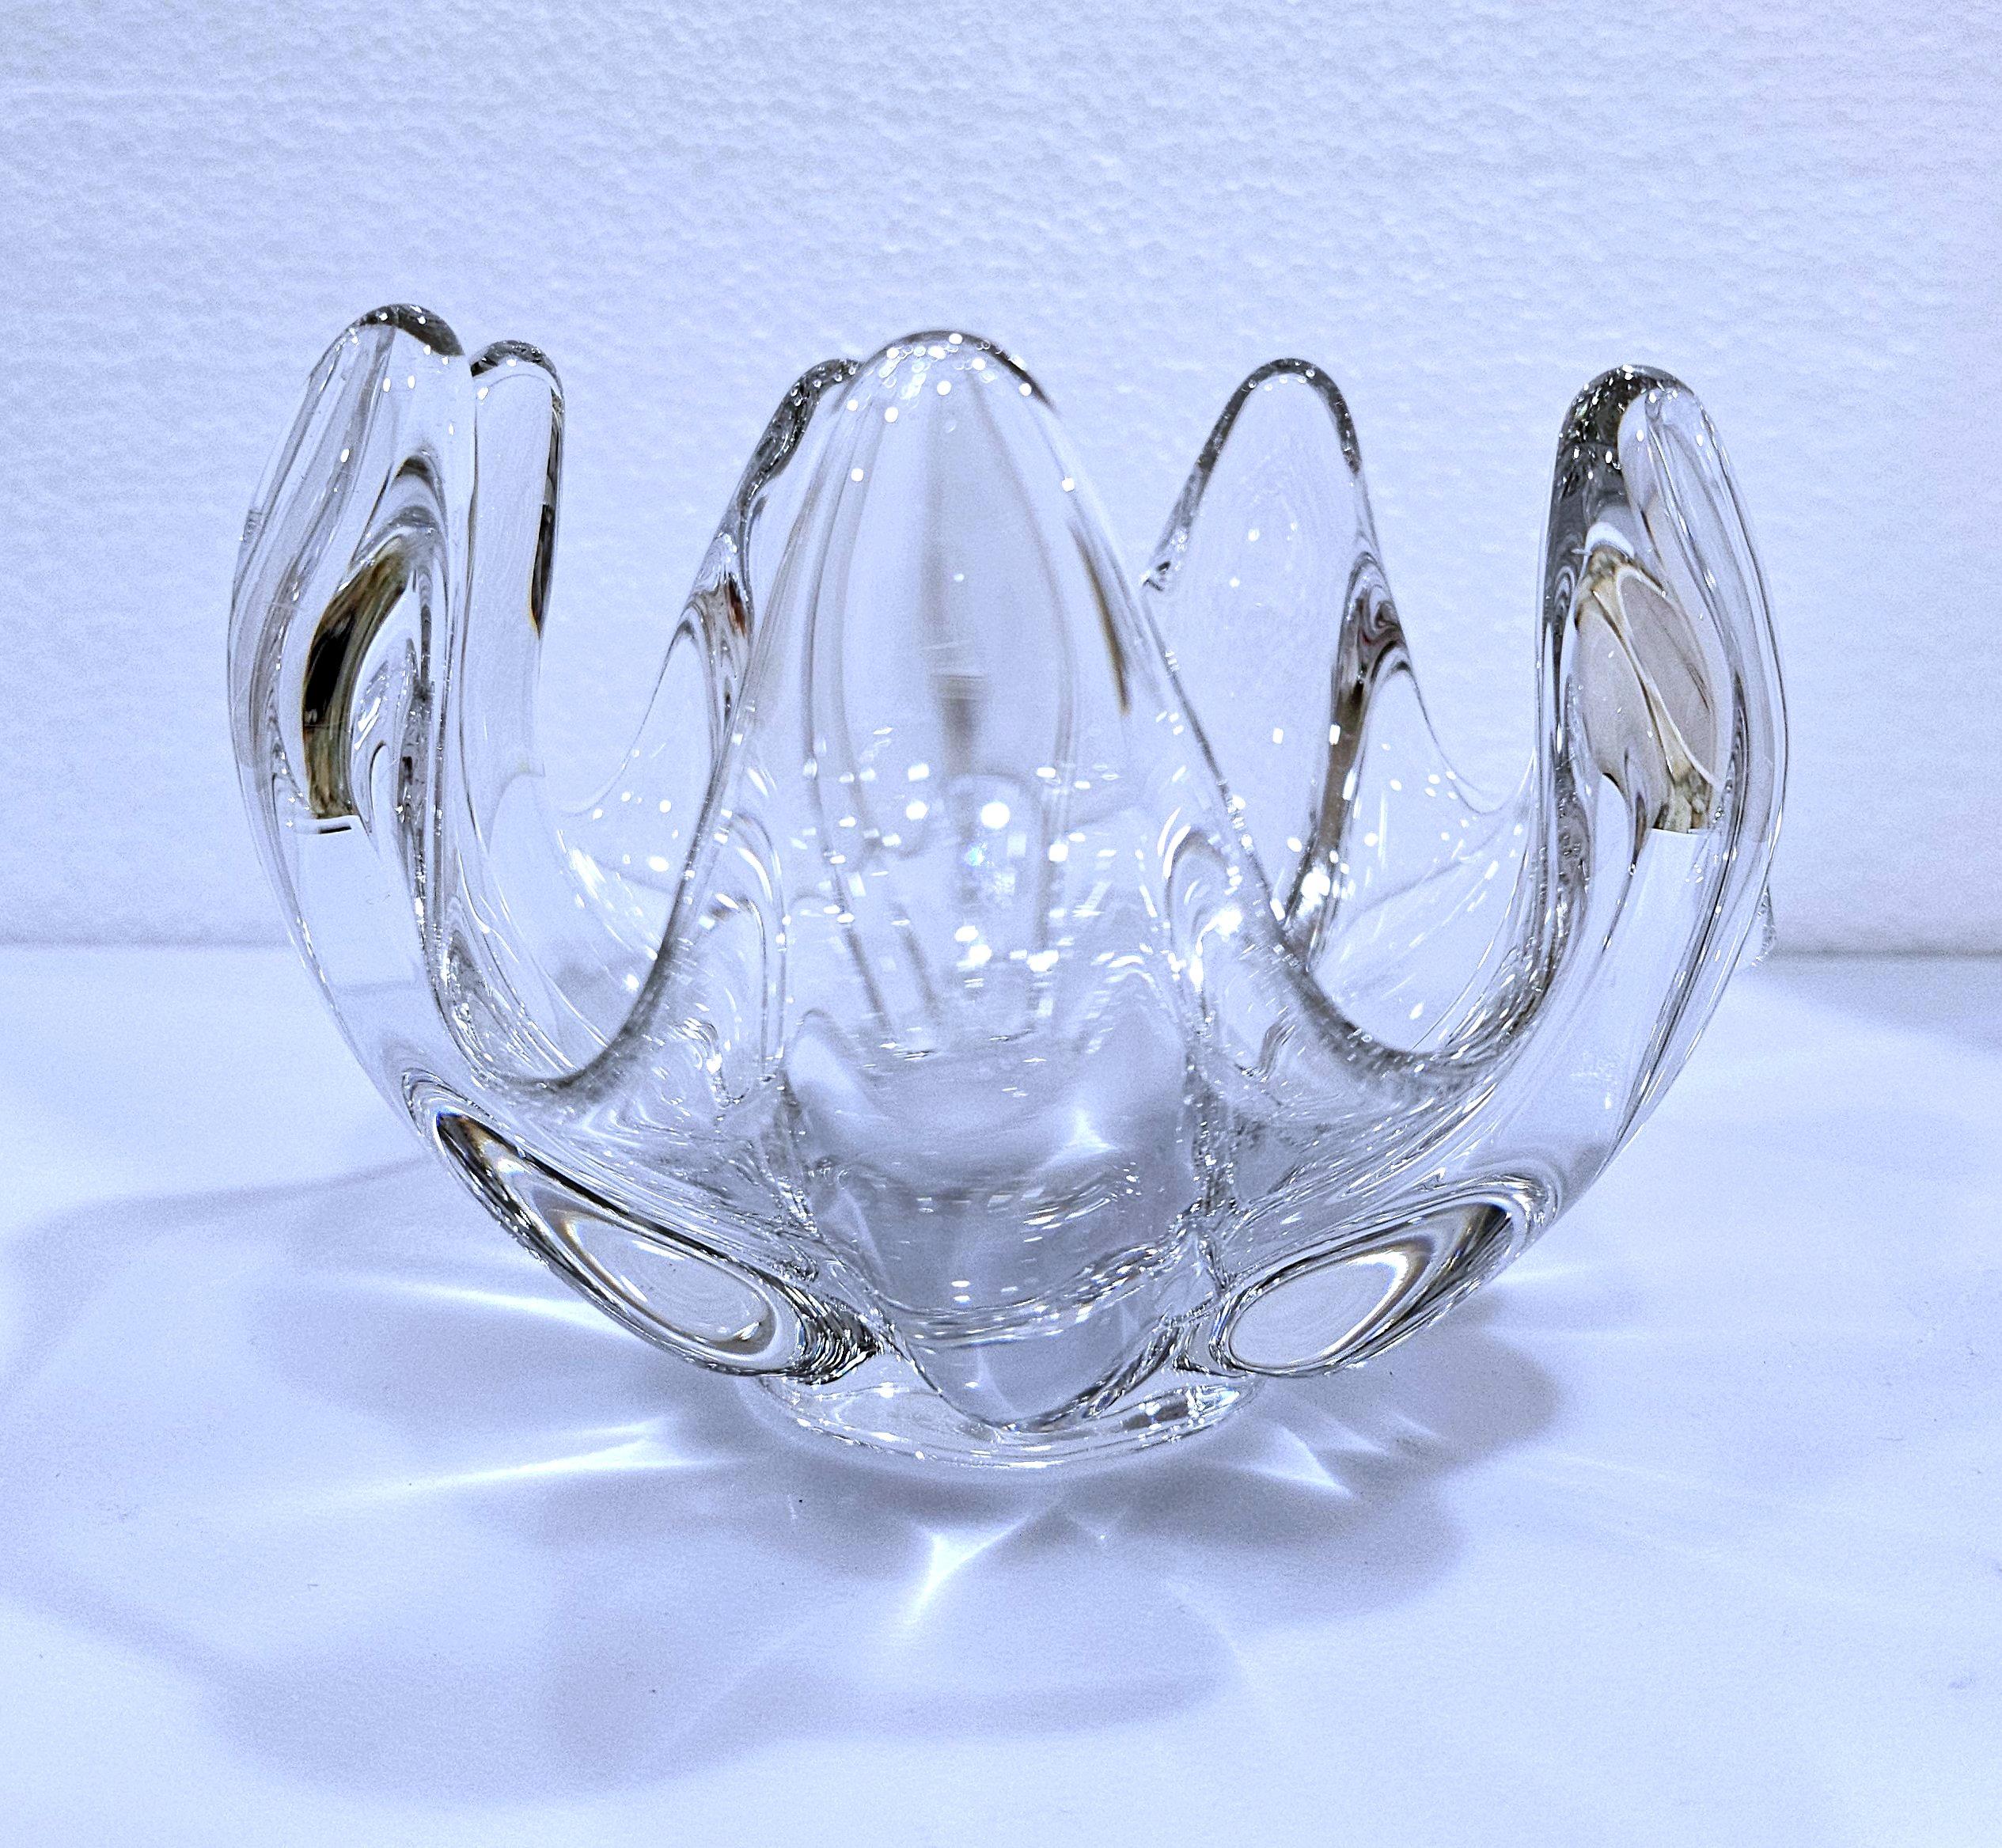 Crystal Art Glass Sculptural Vessel / Dish / Bowl - vintage
Nice Vintage Condition
5.5 x 3.5 inches apx

Measurements are approximate. Please be aware that the color on your monitor and/or in your environment may look slightly different than in